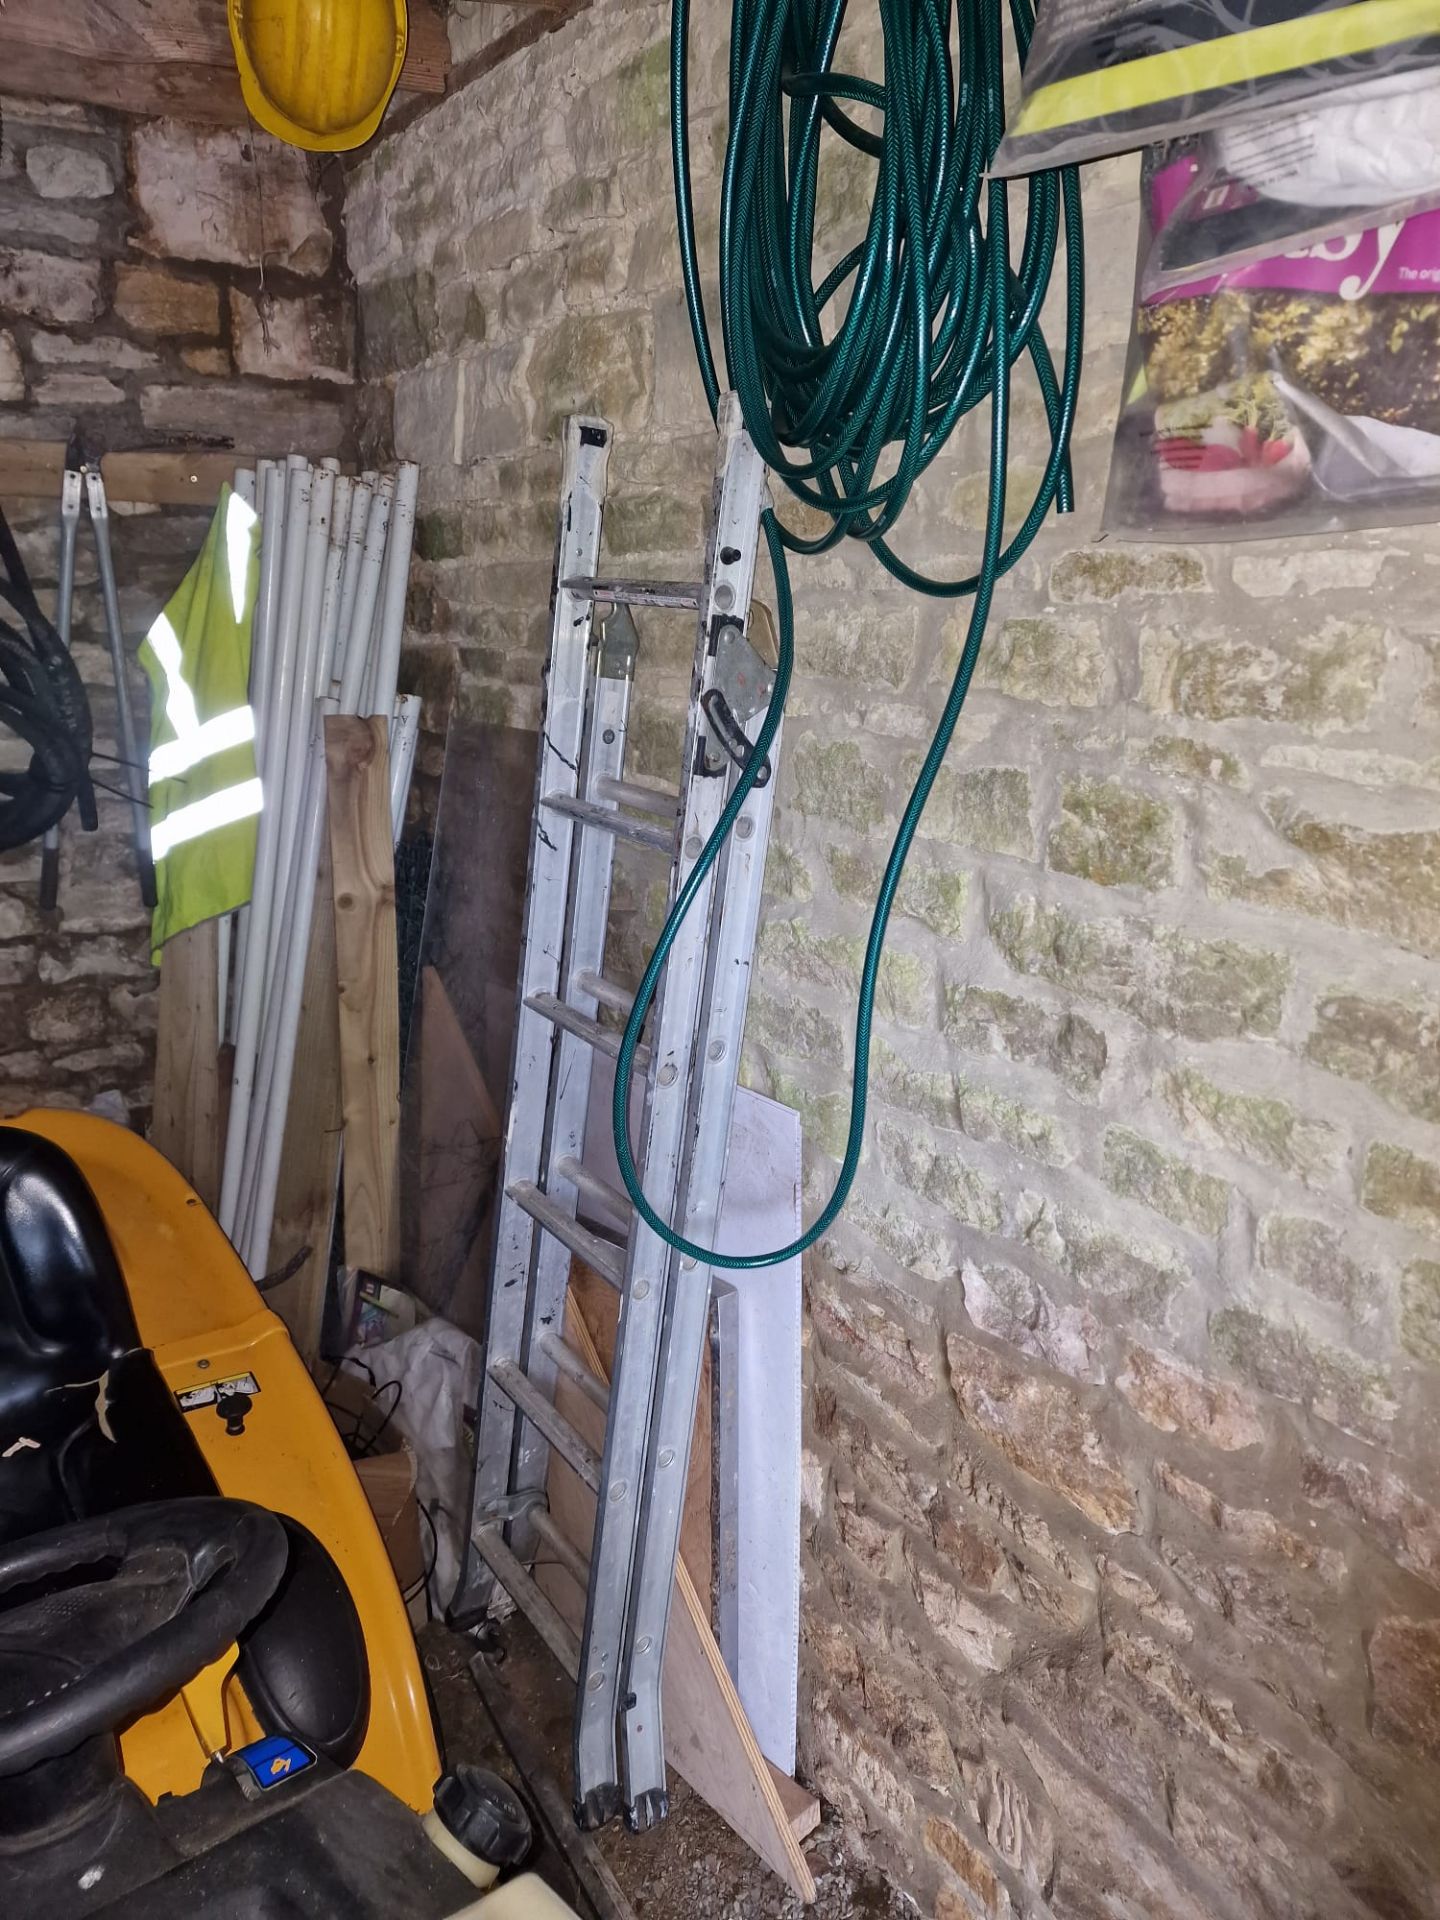 Various Extension, Hose Pipes And Manual Gardening Tools As Found